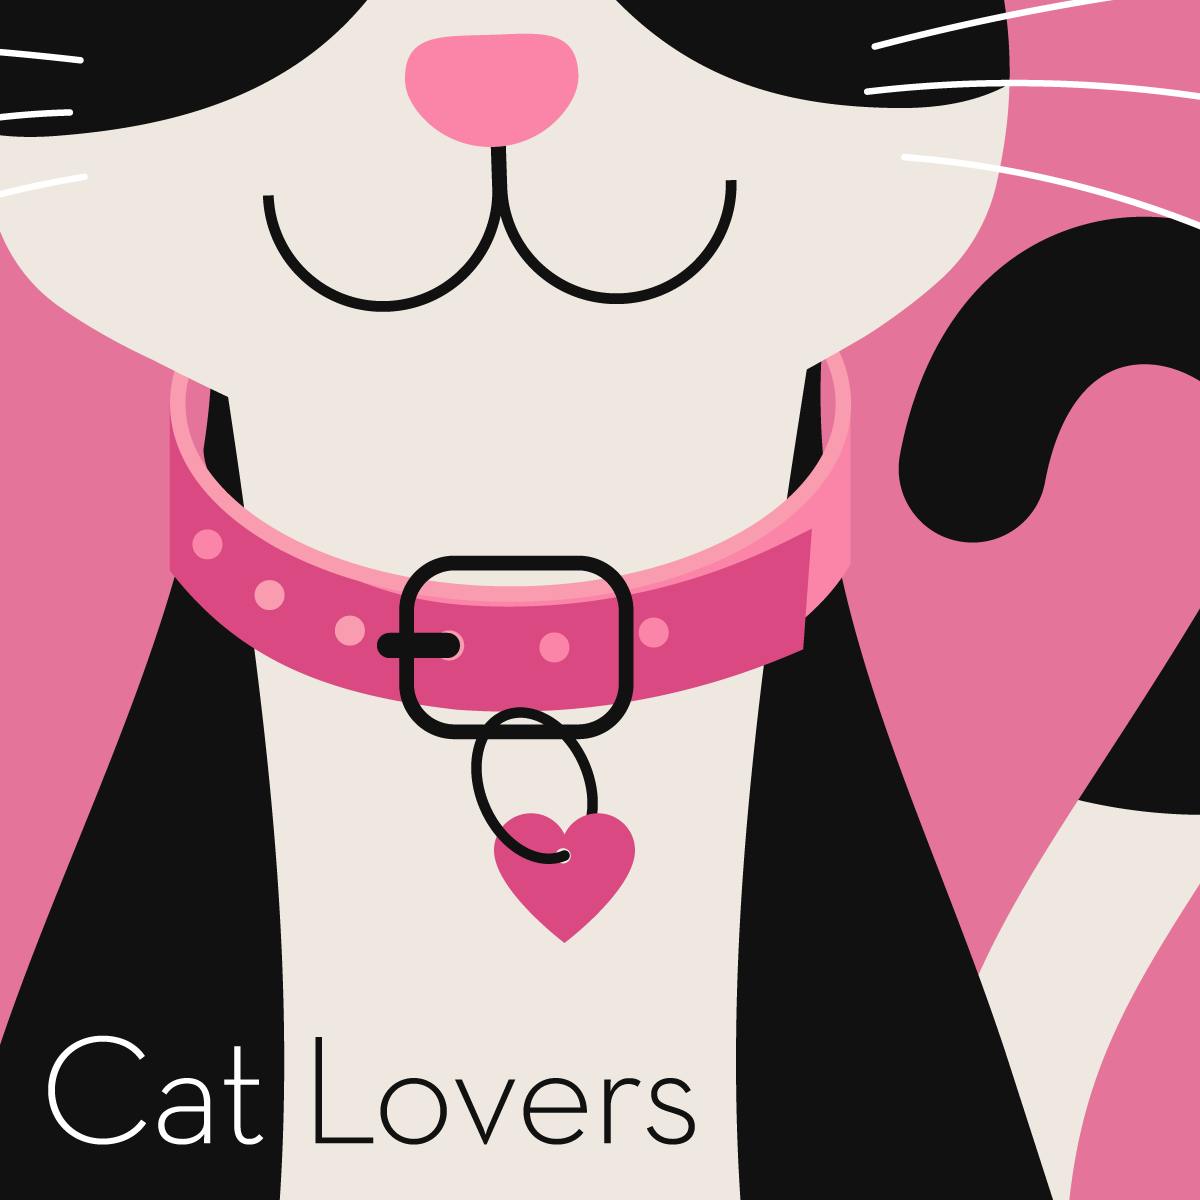 Illustration of a gift guide for cat lovers, showing a black and white cat wearing a pink collar with a heart.